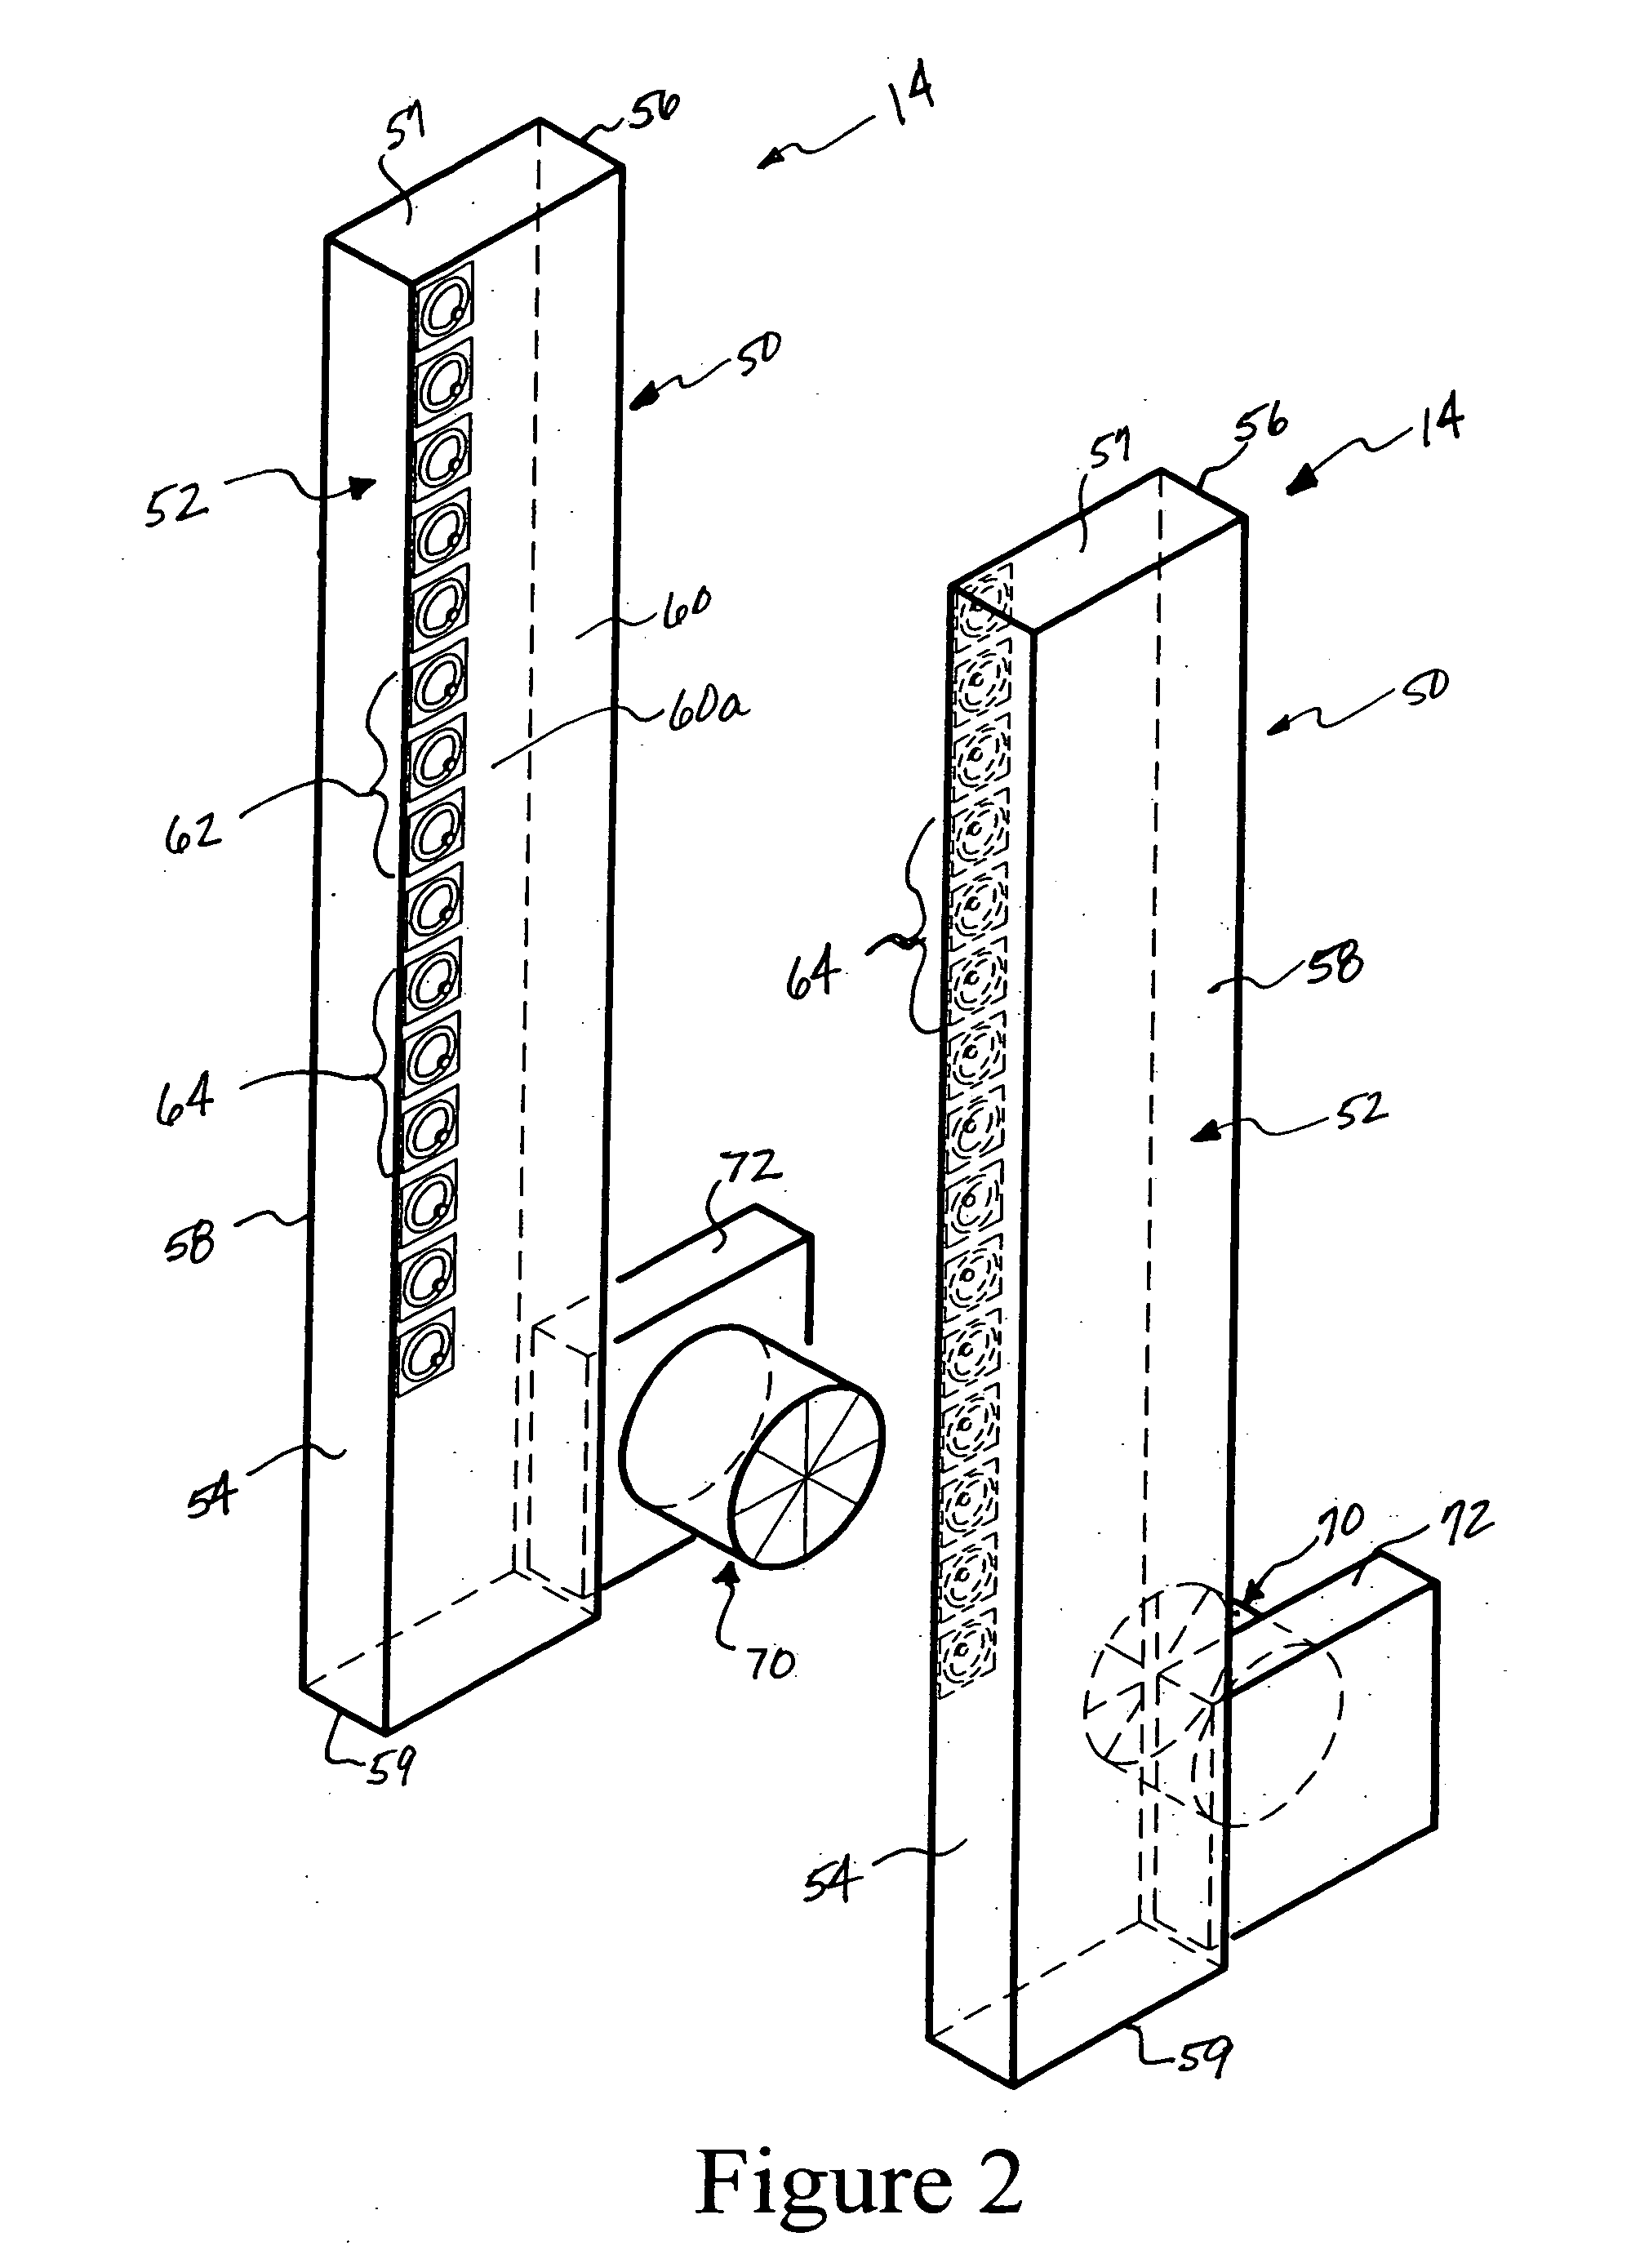 Cabinet for computer devices with air distribution device